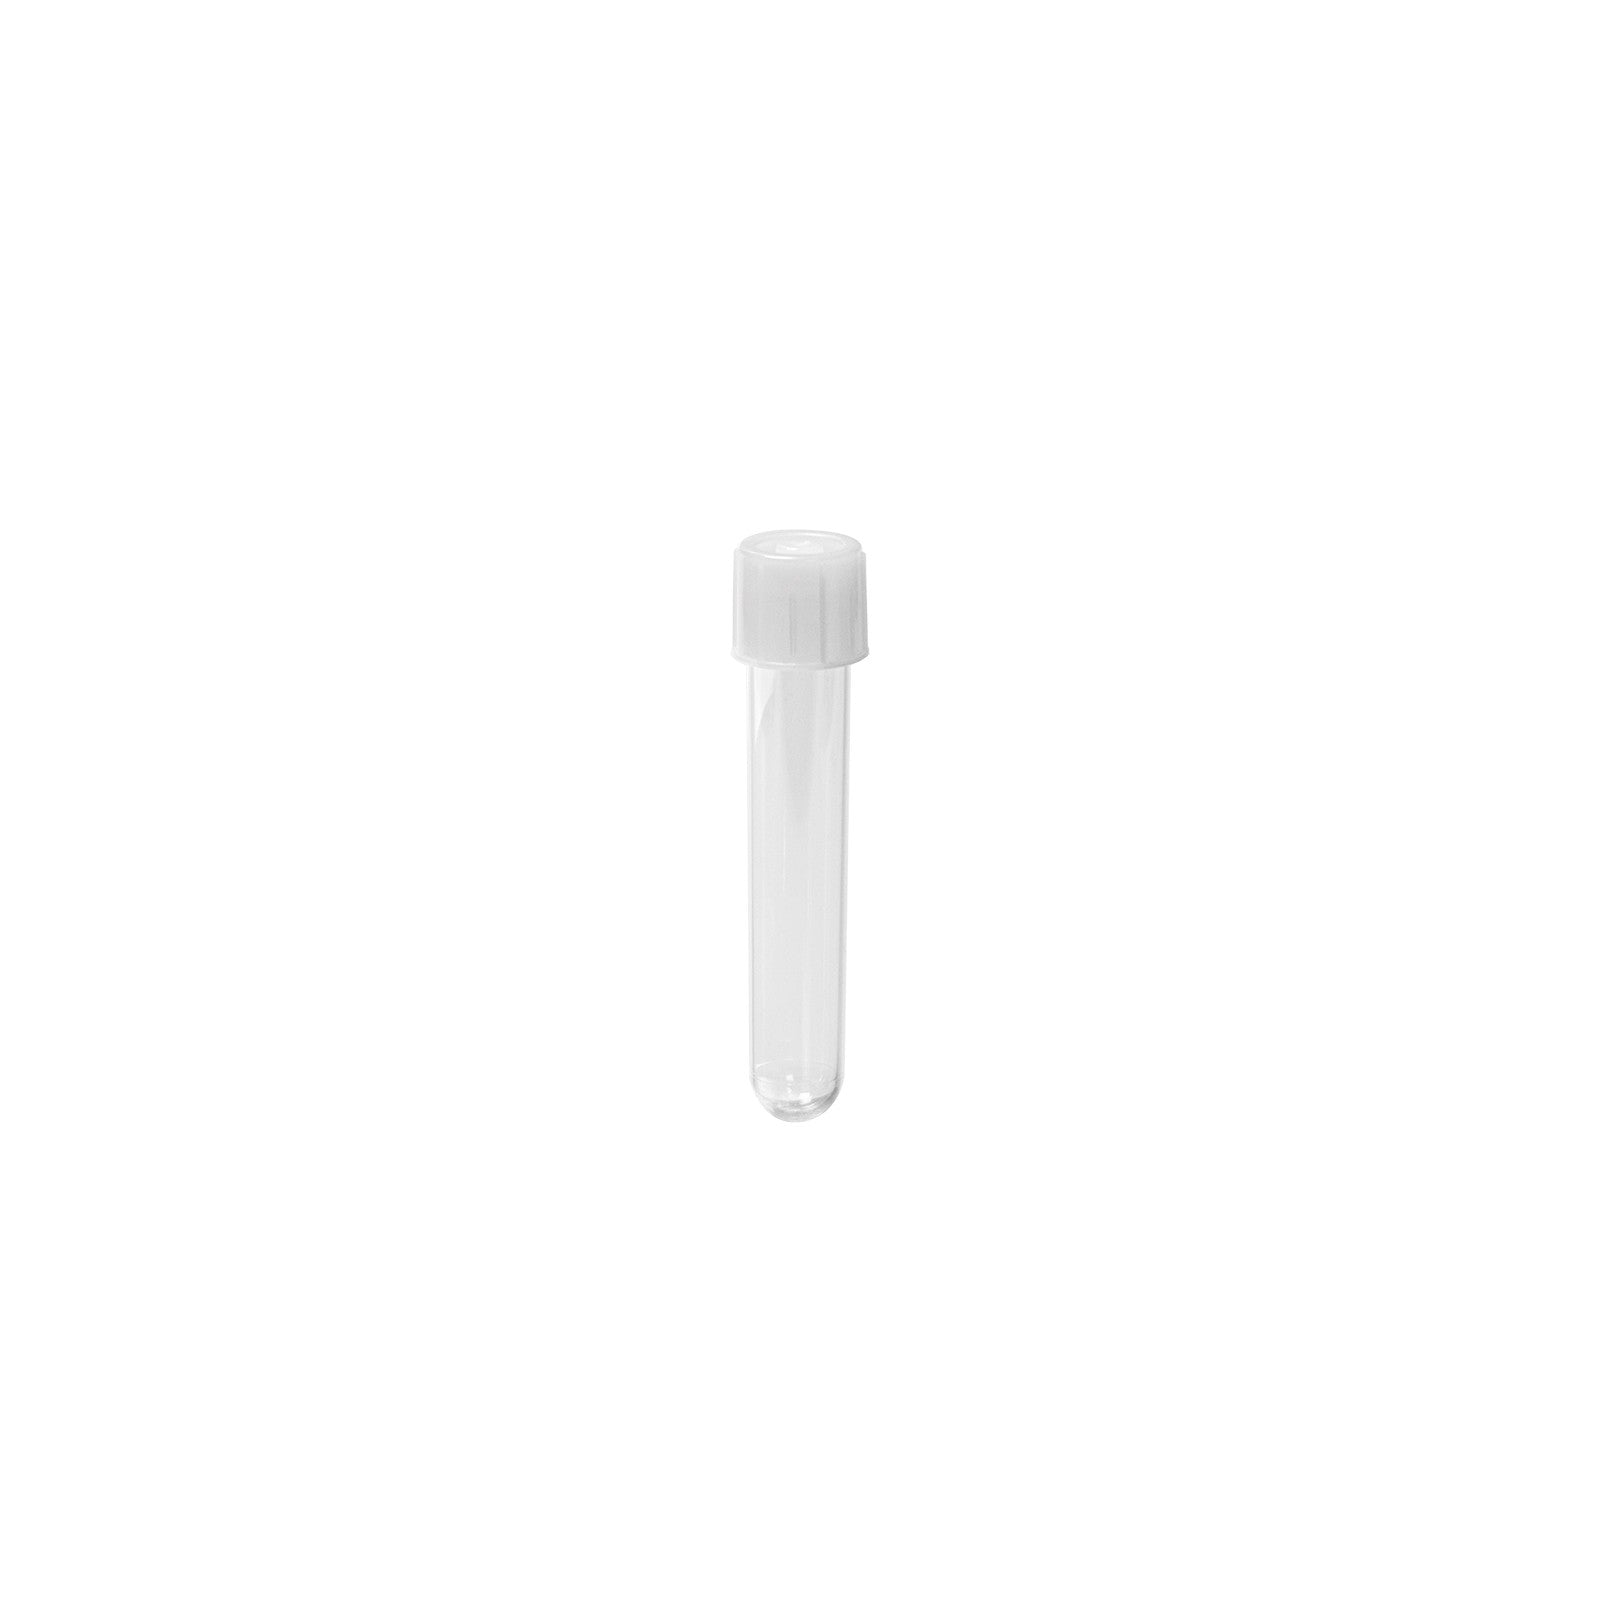 T426-x CULTURE TUBES 17X95mm, STERILE, NON-PRINTED